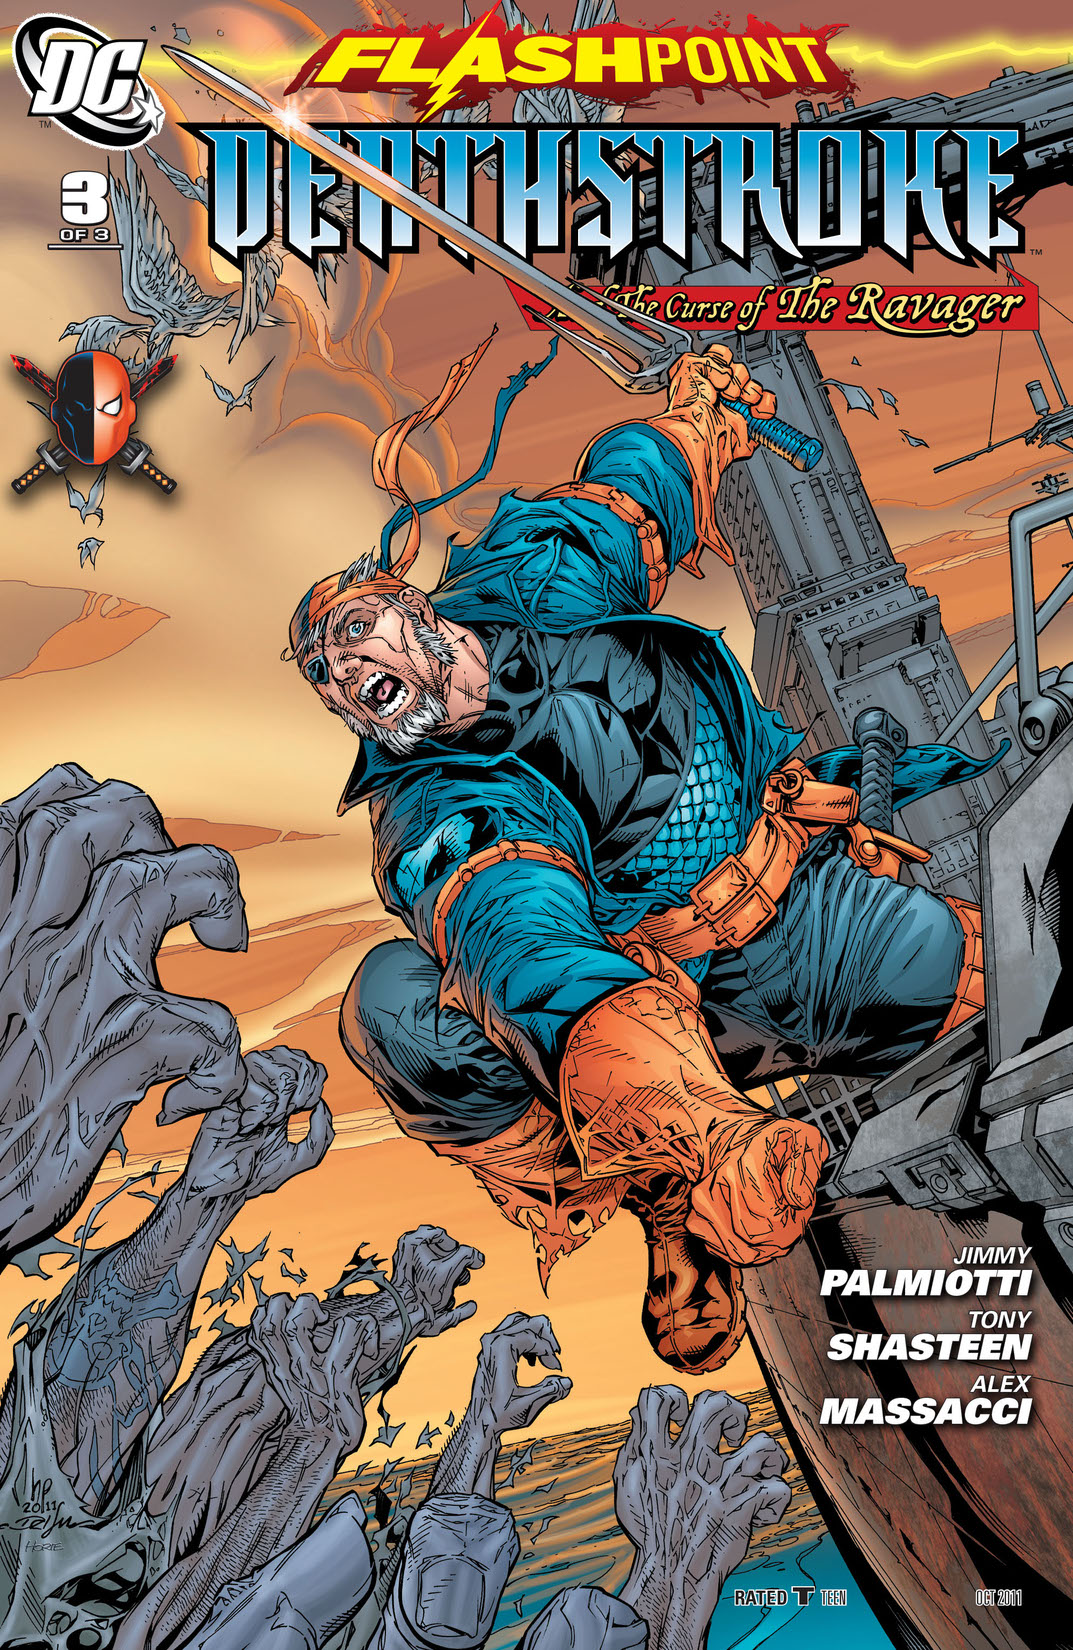 Flashpoint: Deathstroke & the Curse of the Ravager #3 preview images